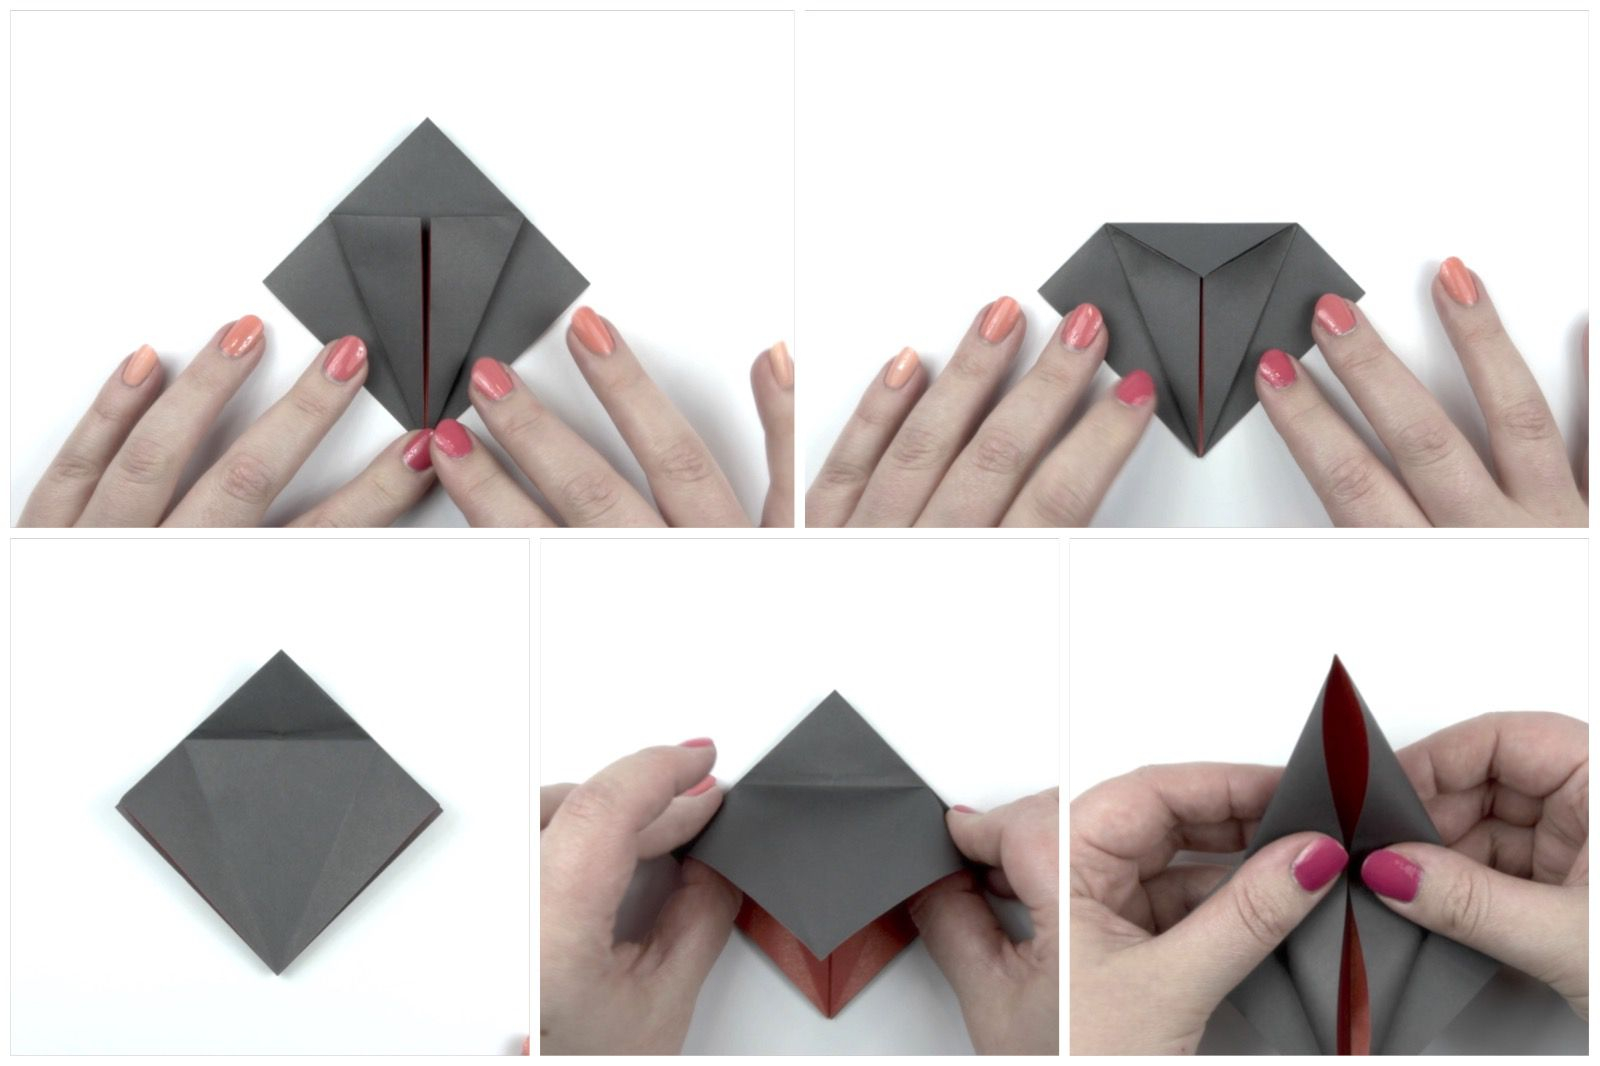 How To Make An Origami Make An Origami Crow For Halloween